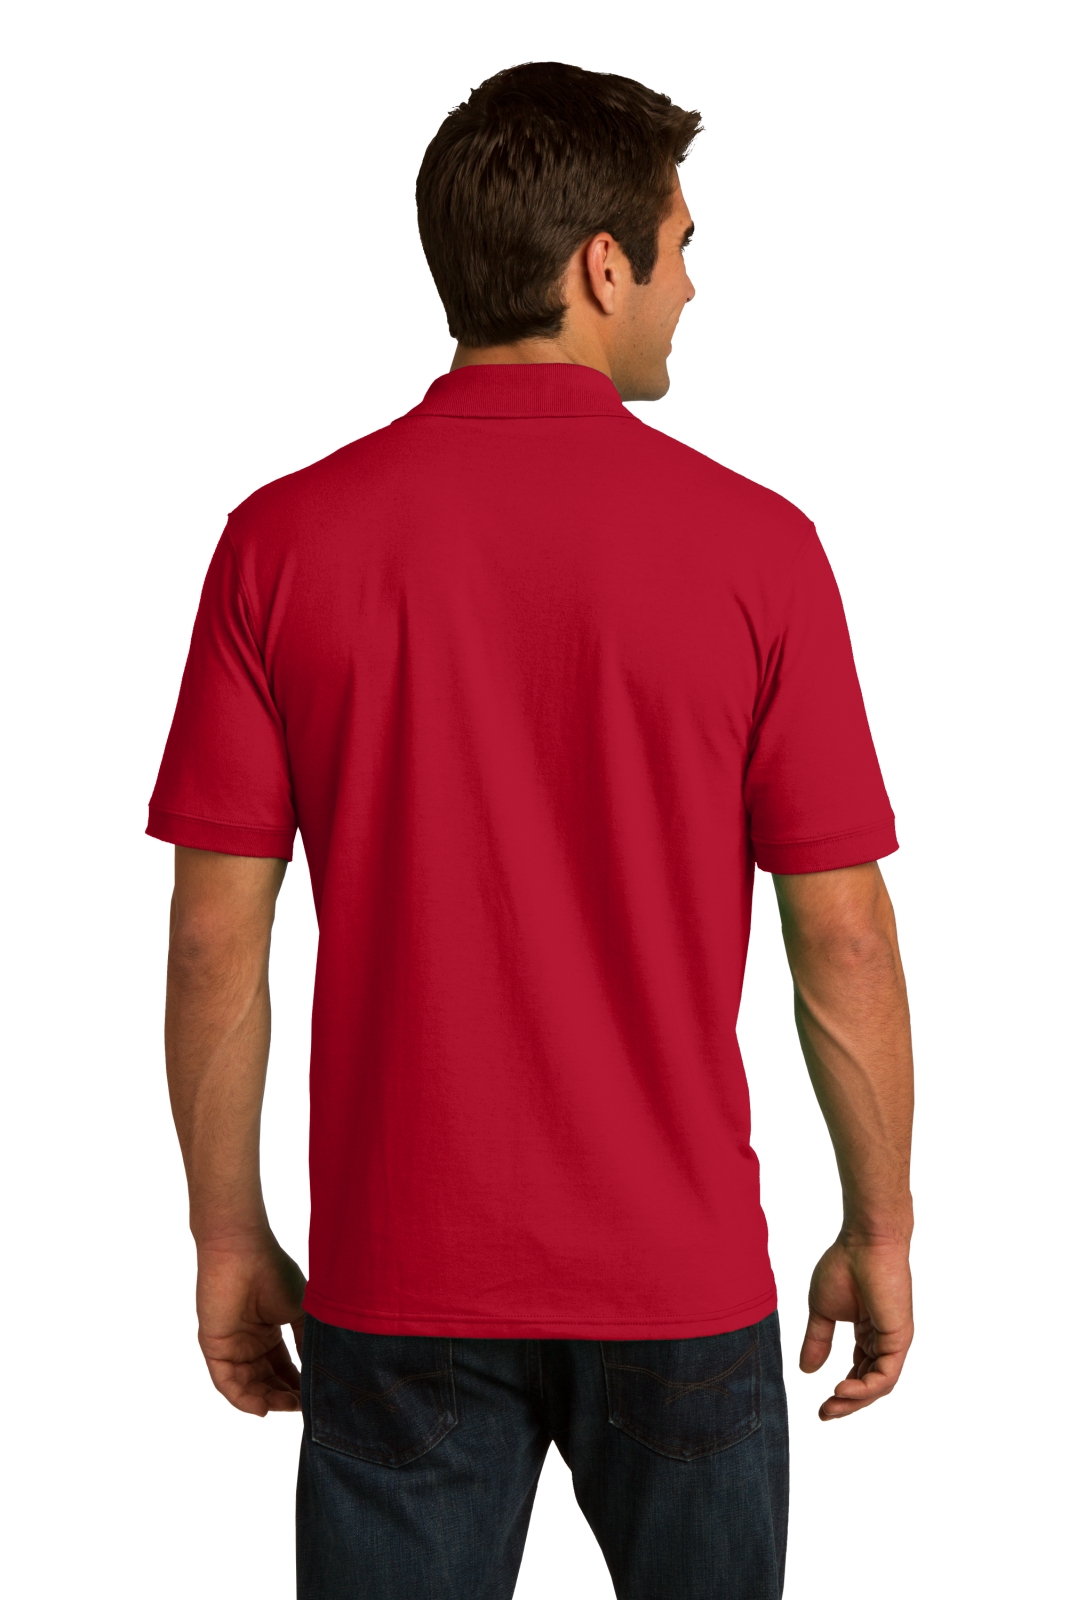 Port & Company Men's KP55T Golf Shirt Tall 5.5-Ounce Jersey Knit Polo - image 3 of 3